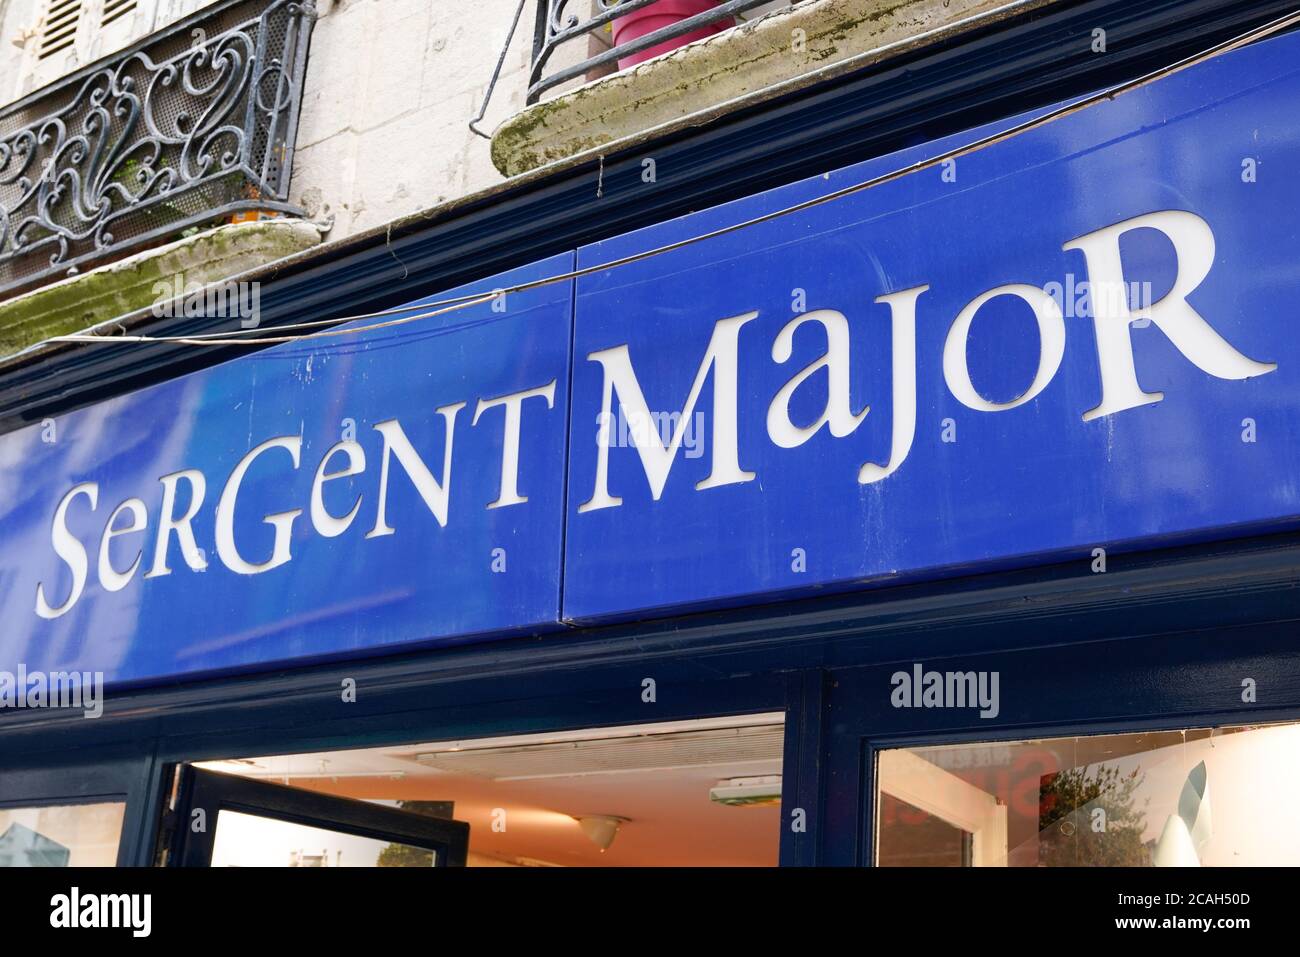 Bordeaux , Aquitaine / France - 08 04 2020 : sergent major sign text and  logo of shop chain of clothing children kids store Stock Photo - Alamy